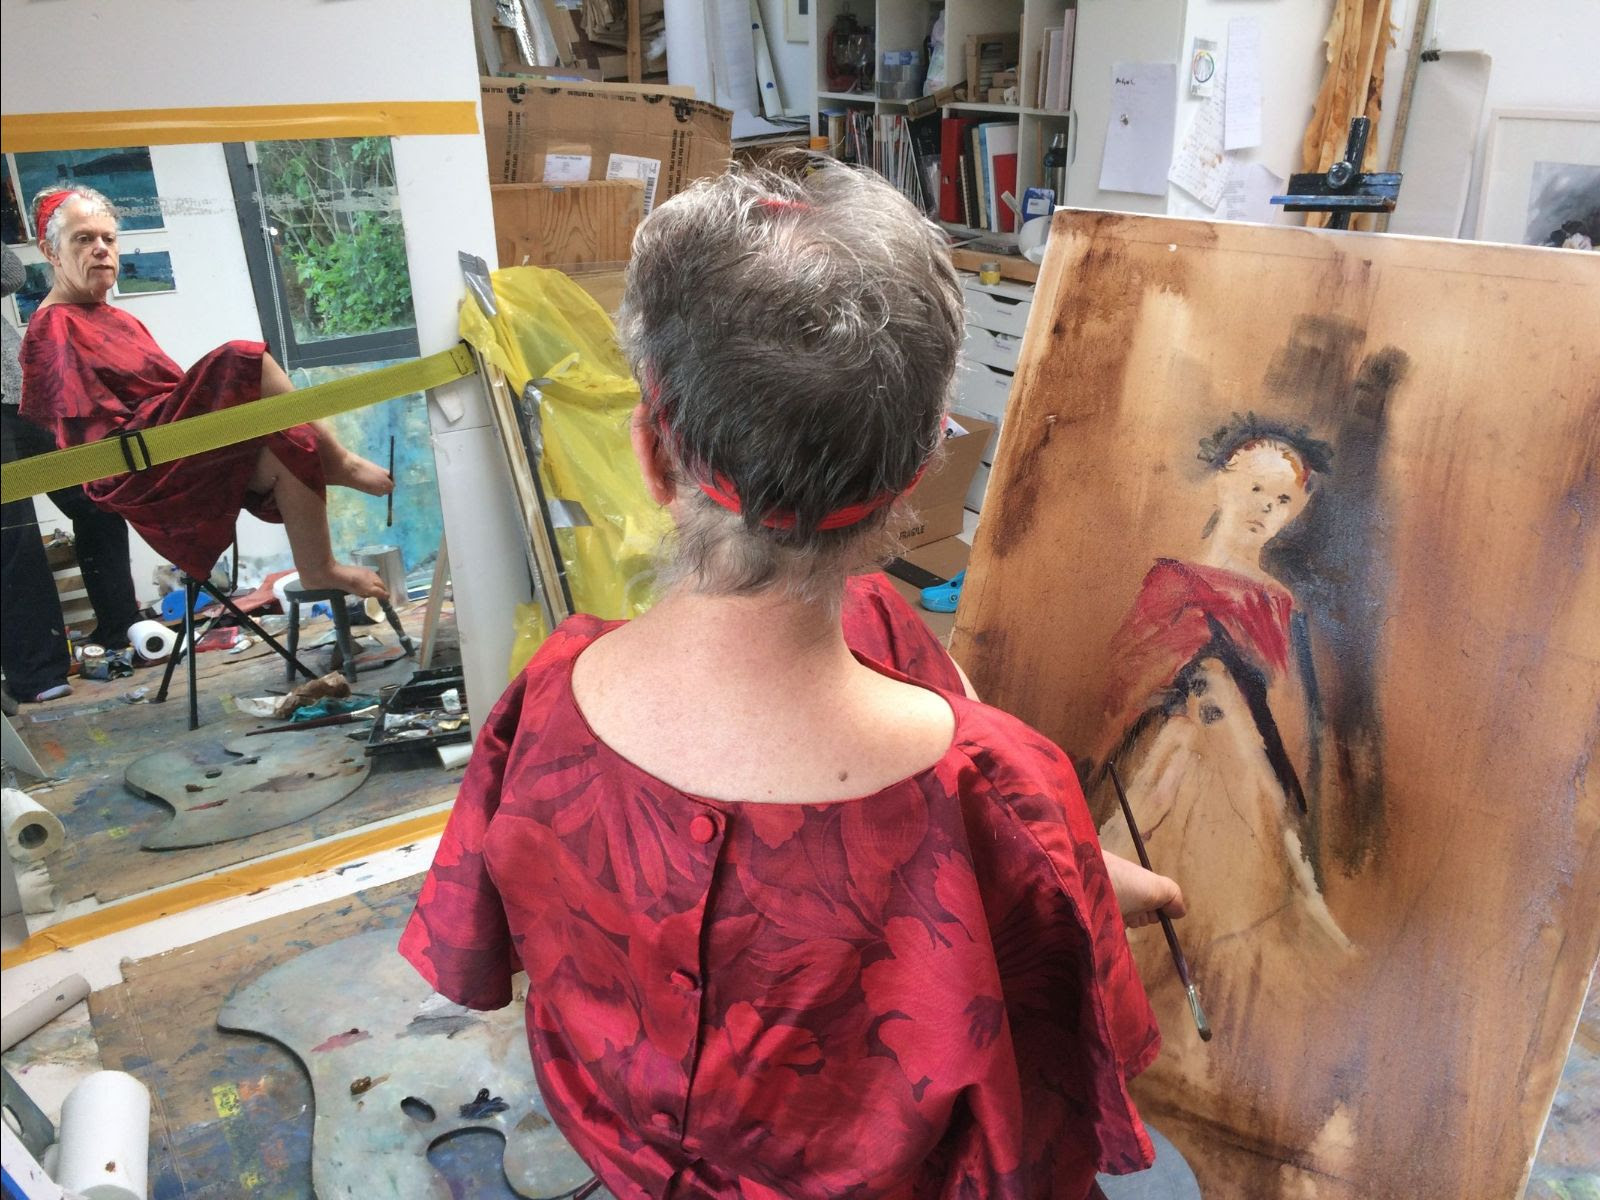 In the foreground, Mary Duffy is seen from behind painting a self-portrait with her left foot, and wearing a red floral-pattern dress. In the background to the left, her reflection is visible, revealing her expression of concentration and the bits and pieces of her artist's studio.